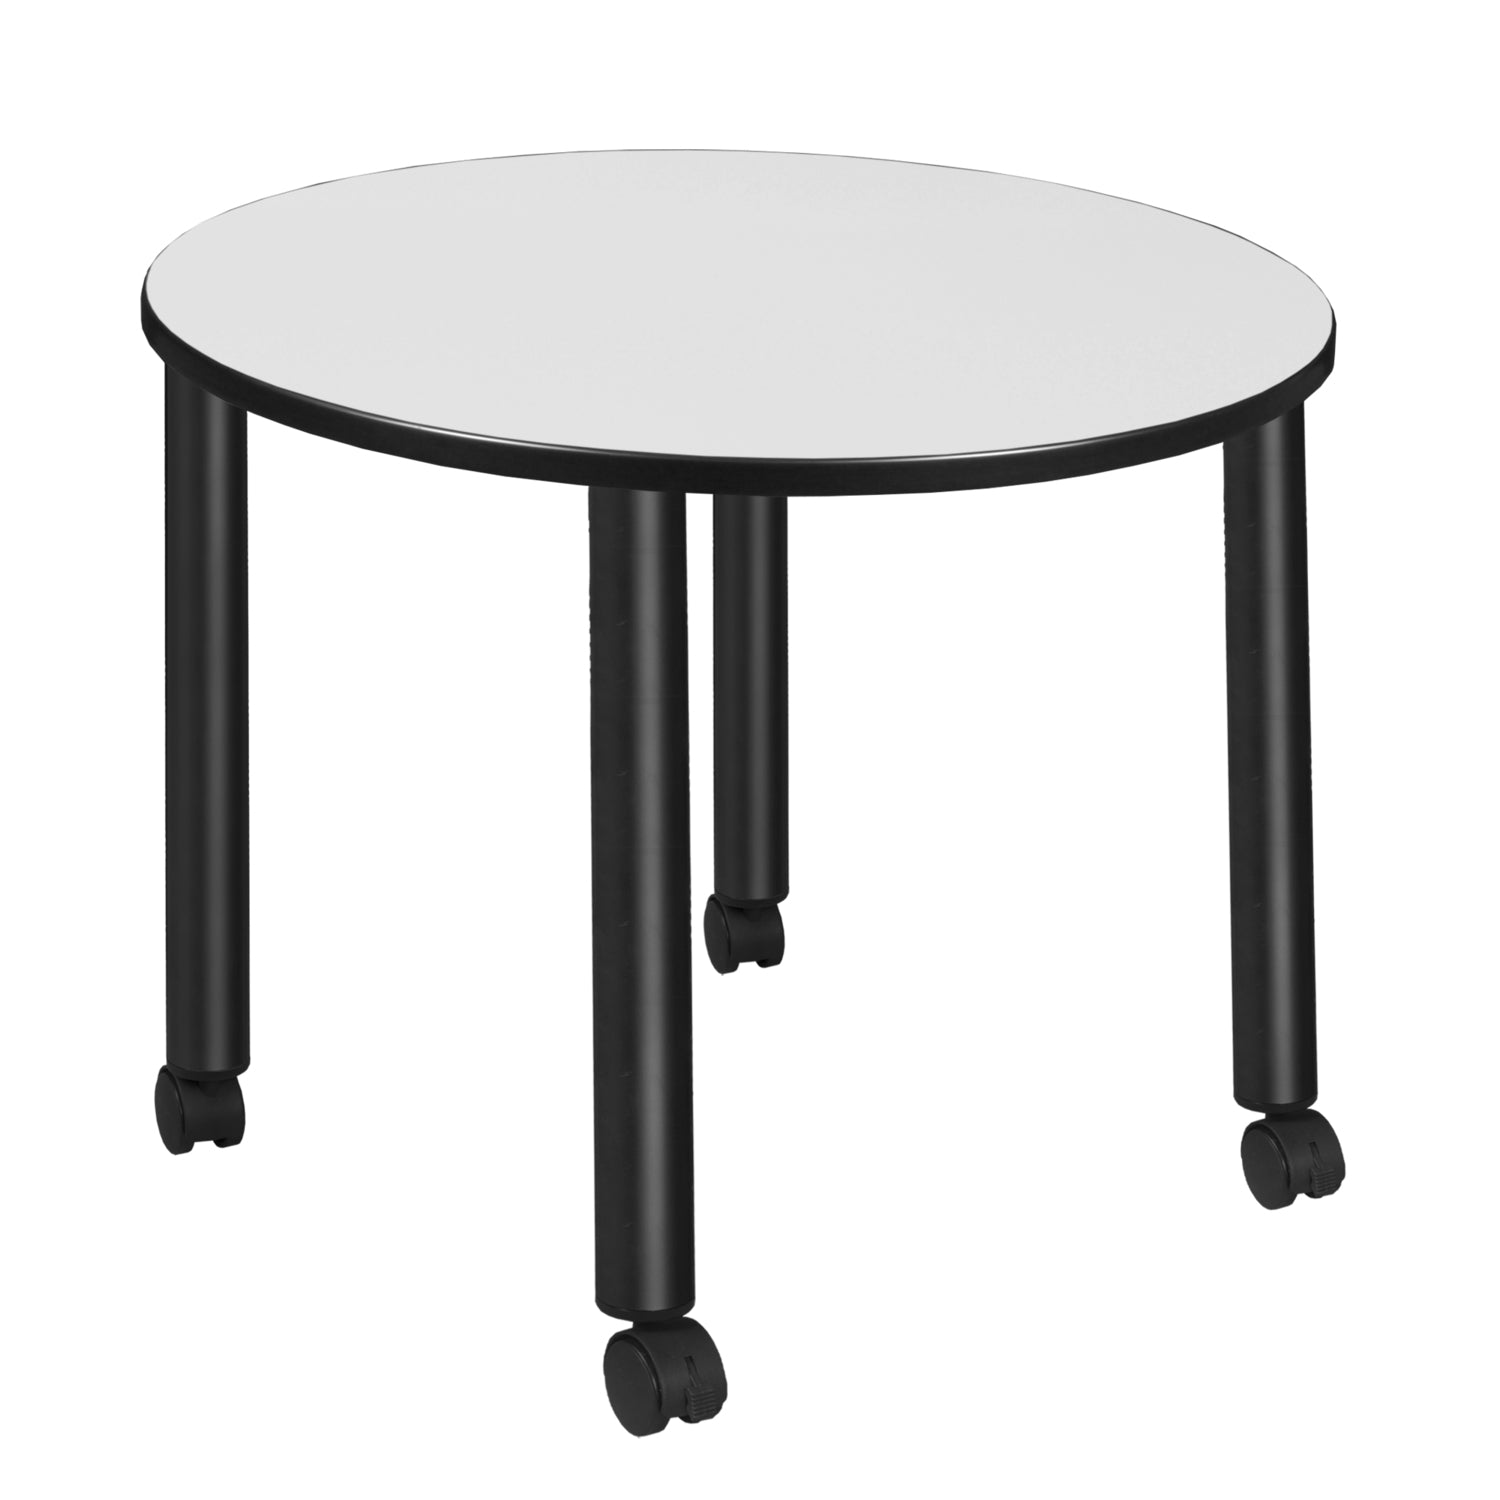 Kee 42" Round Mobile Breakroom Table